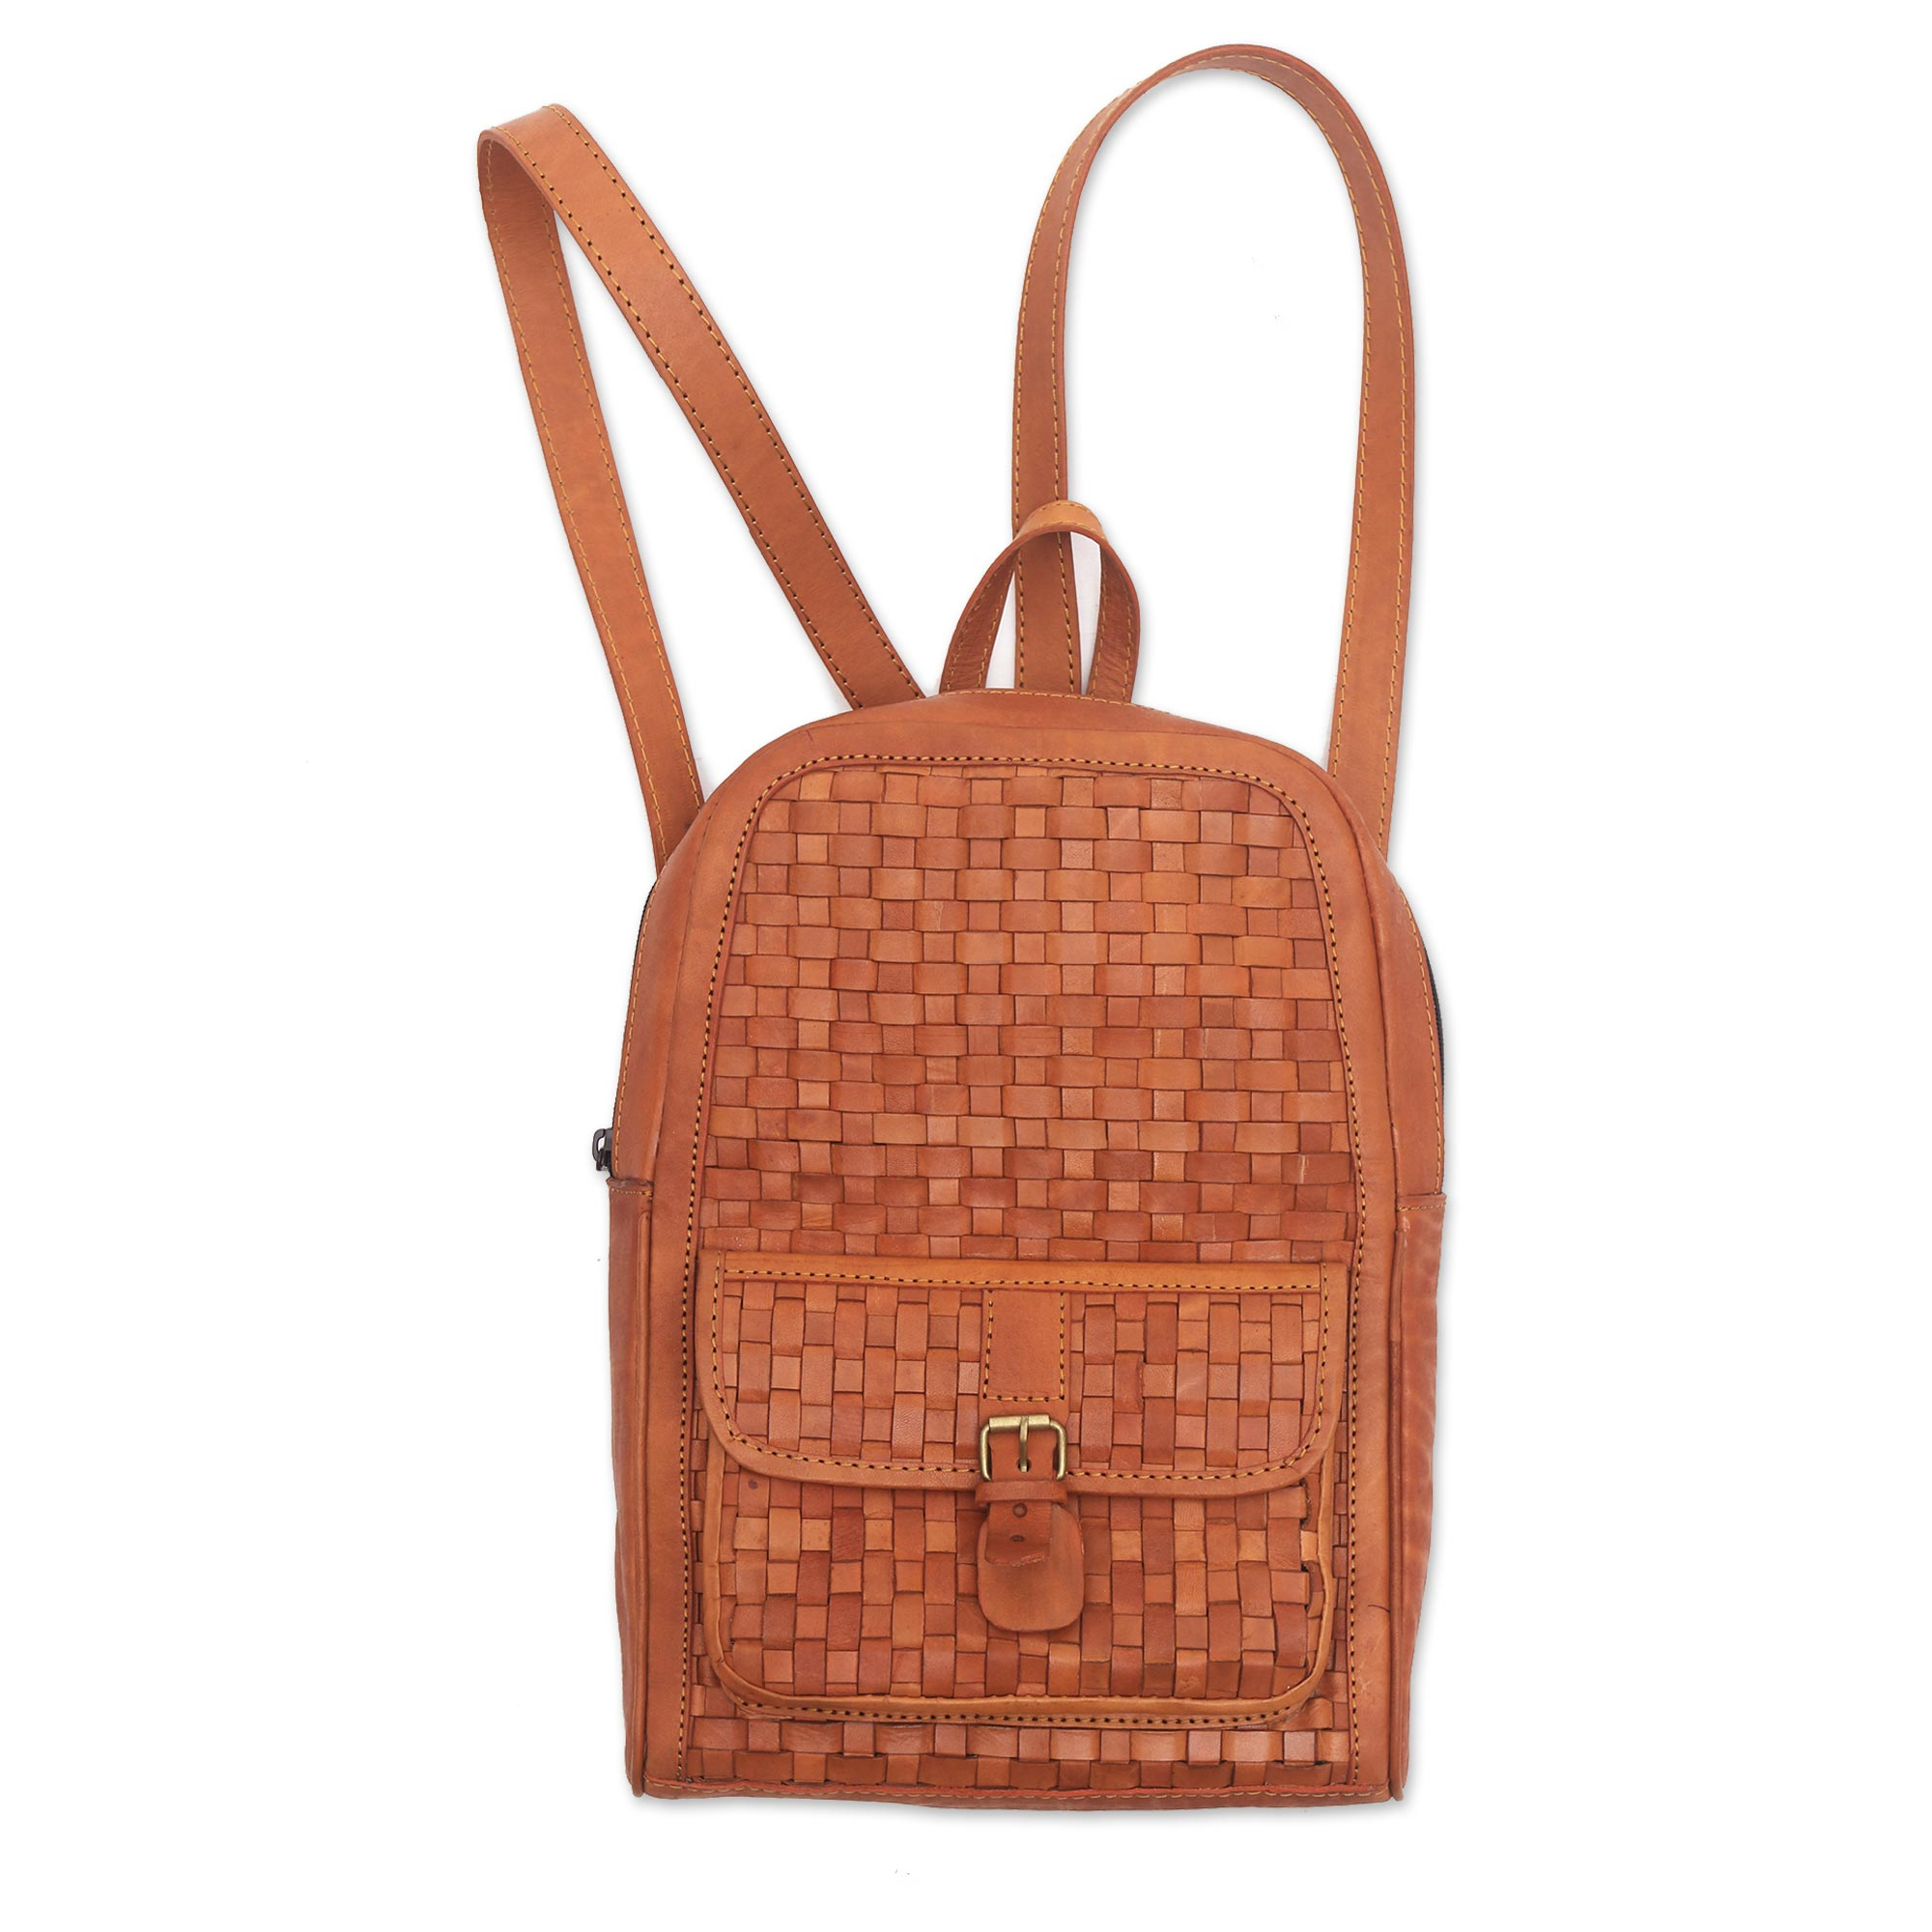 Woven Burnt Orange Leather Backpack from Java - Back to School Weave ...